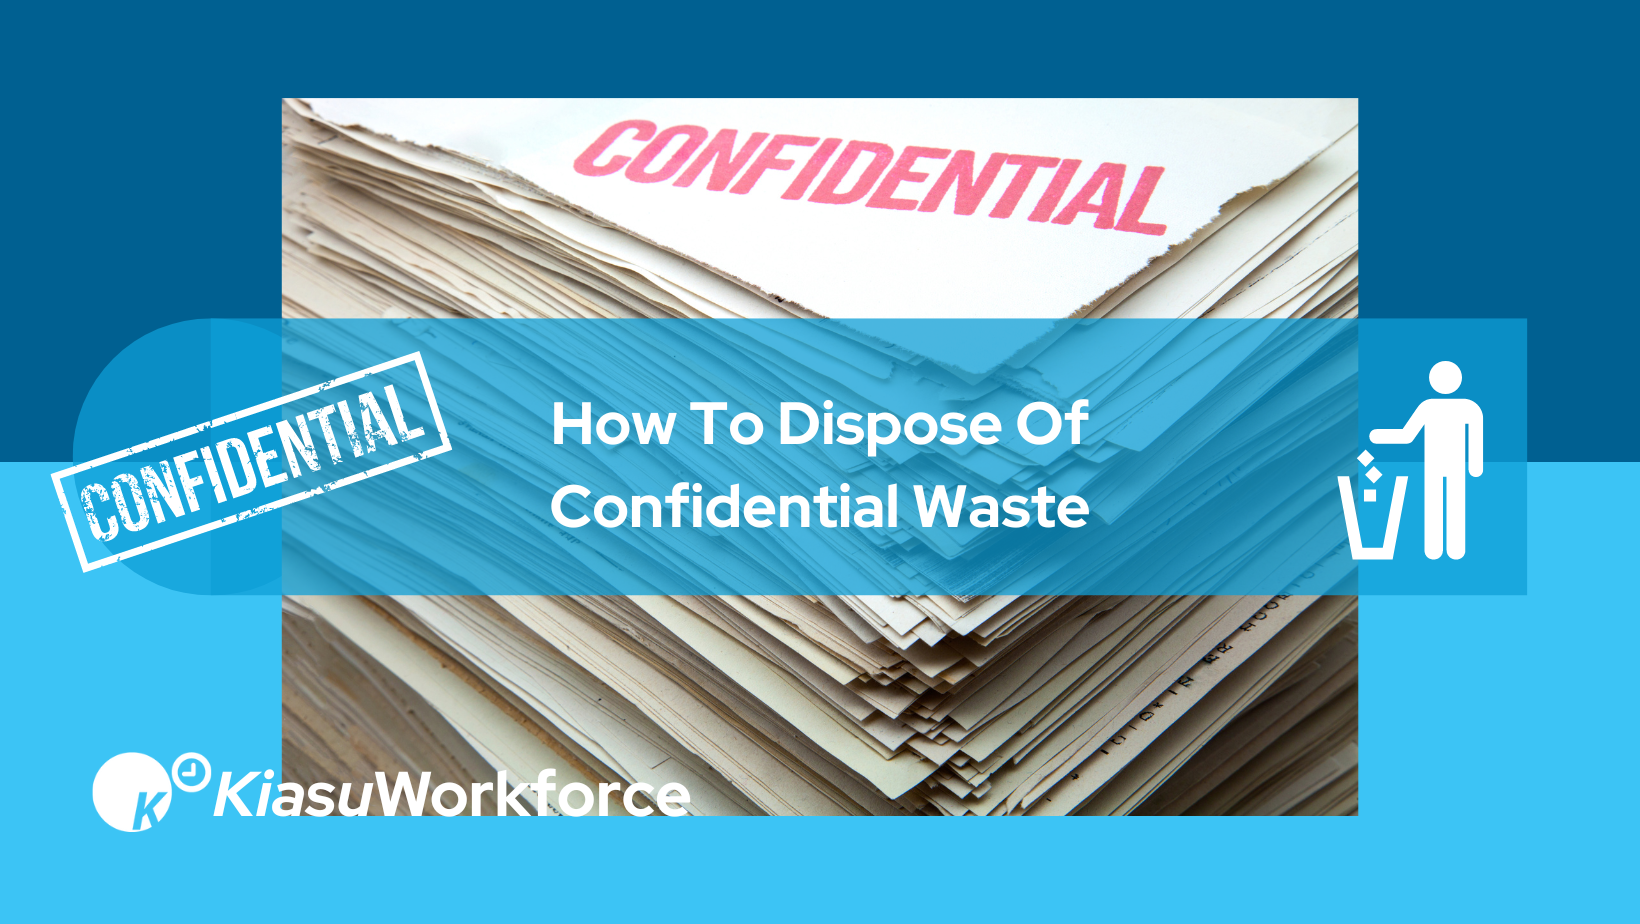 What Is Confidential Waste, and How To Dispose Of It Properly